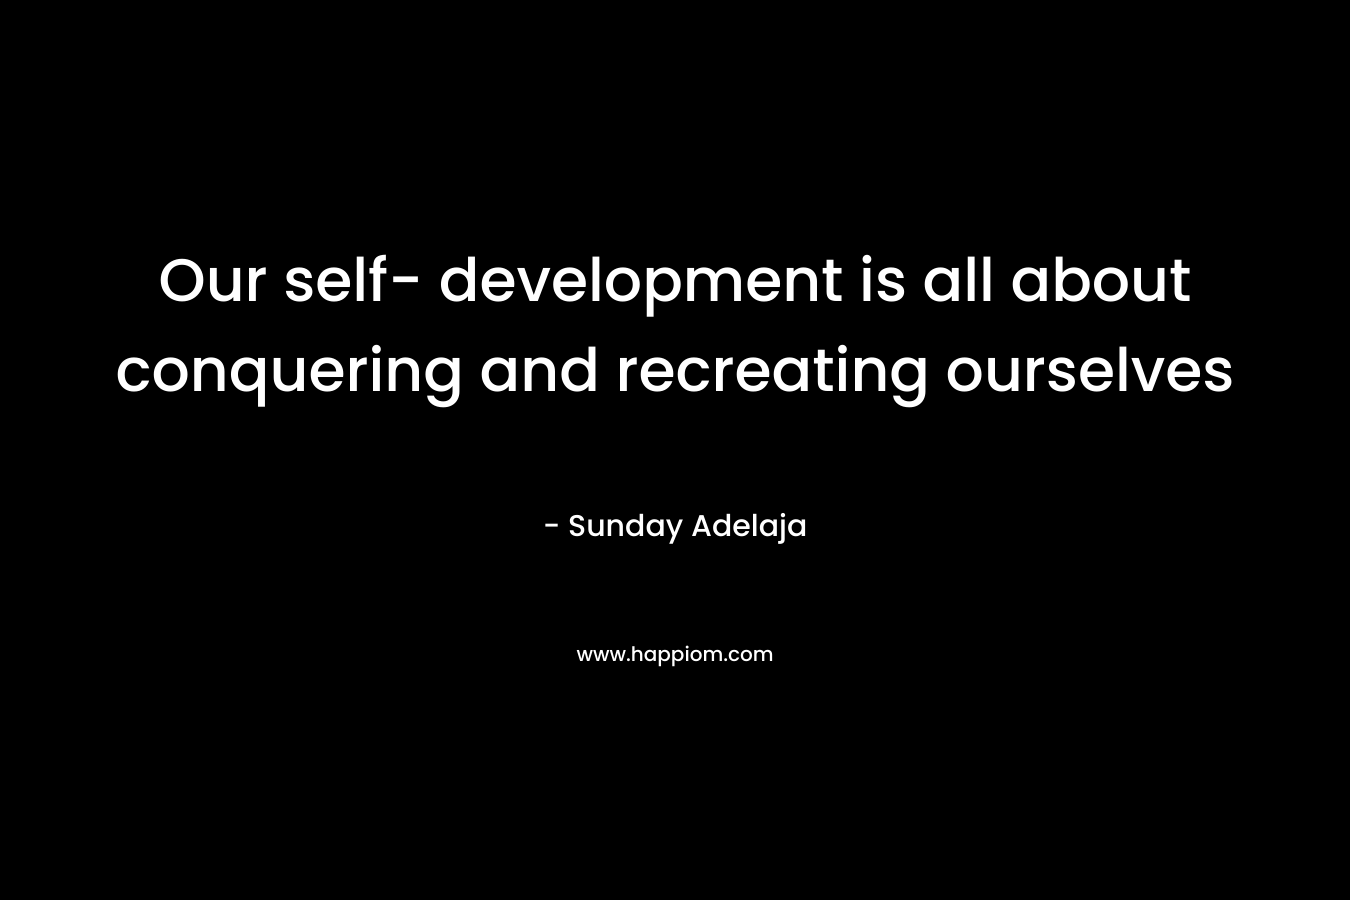 Our self- development is all about conquering and recreating ourselves